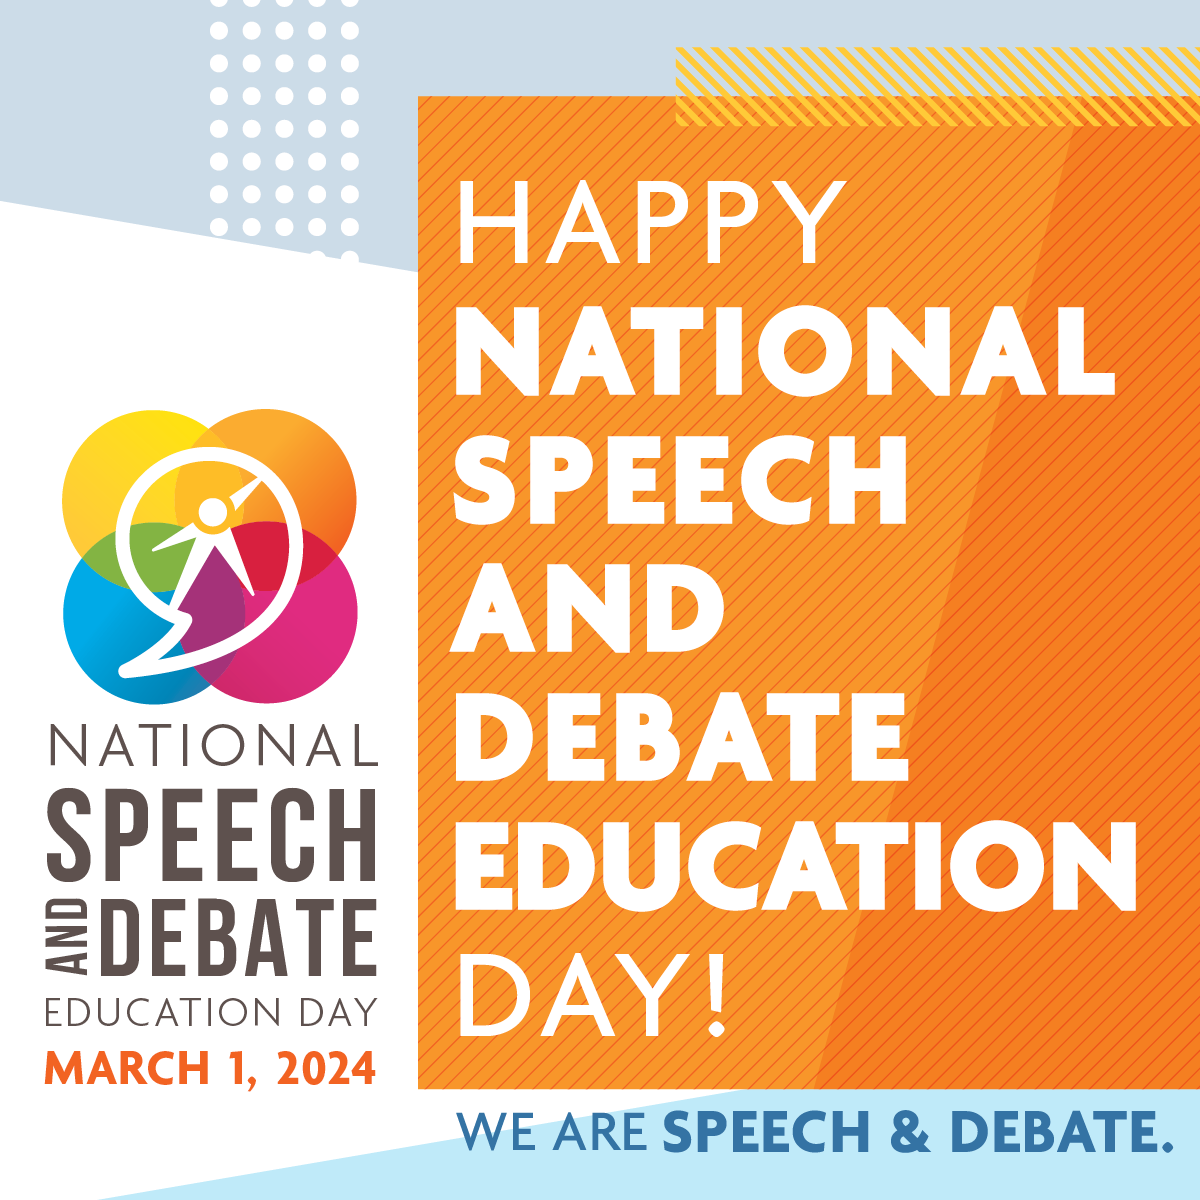 Happy National Speech and Debate Education Day